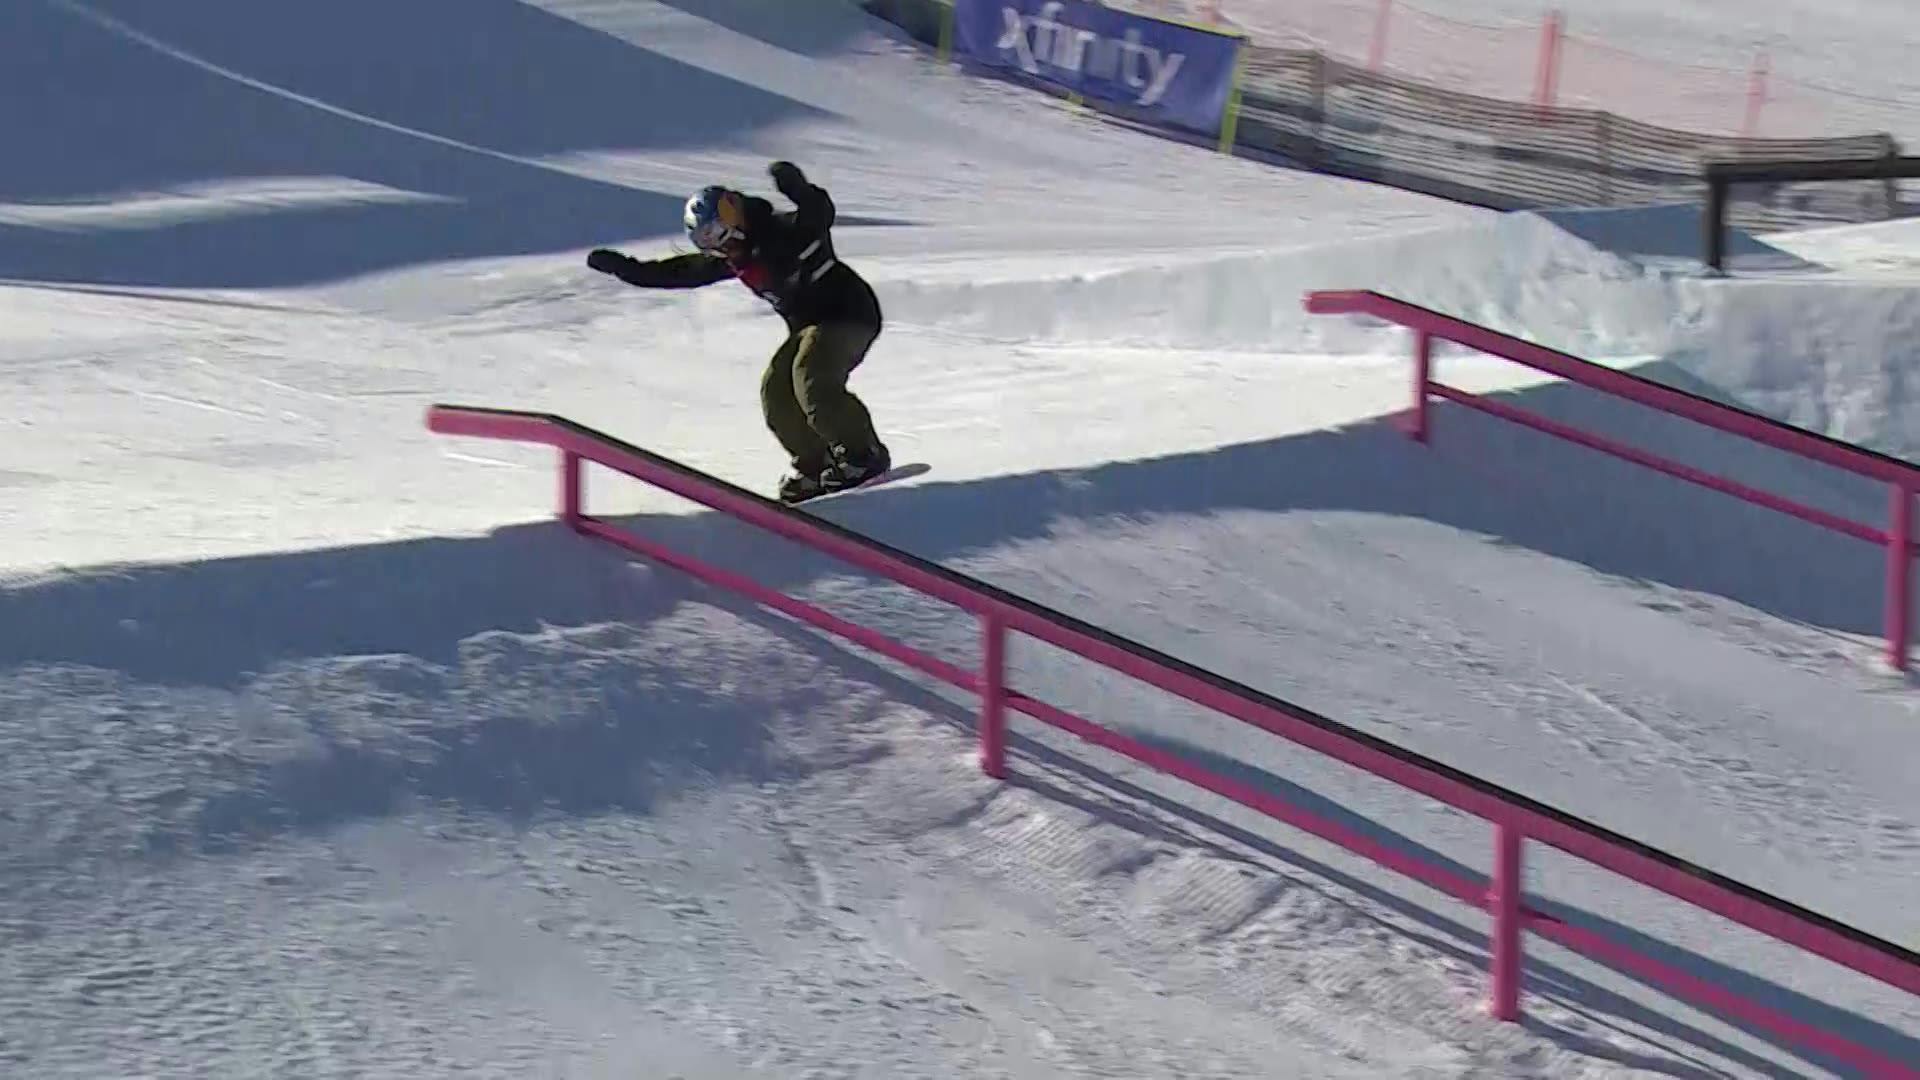 Toyota U.S. Grand Prix Mammoth Mountain: U.S Women's Snowboard Slopestyle Qualifier Highlights| USSS Event Replays